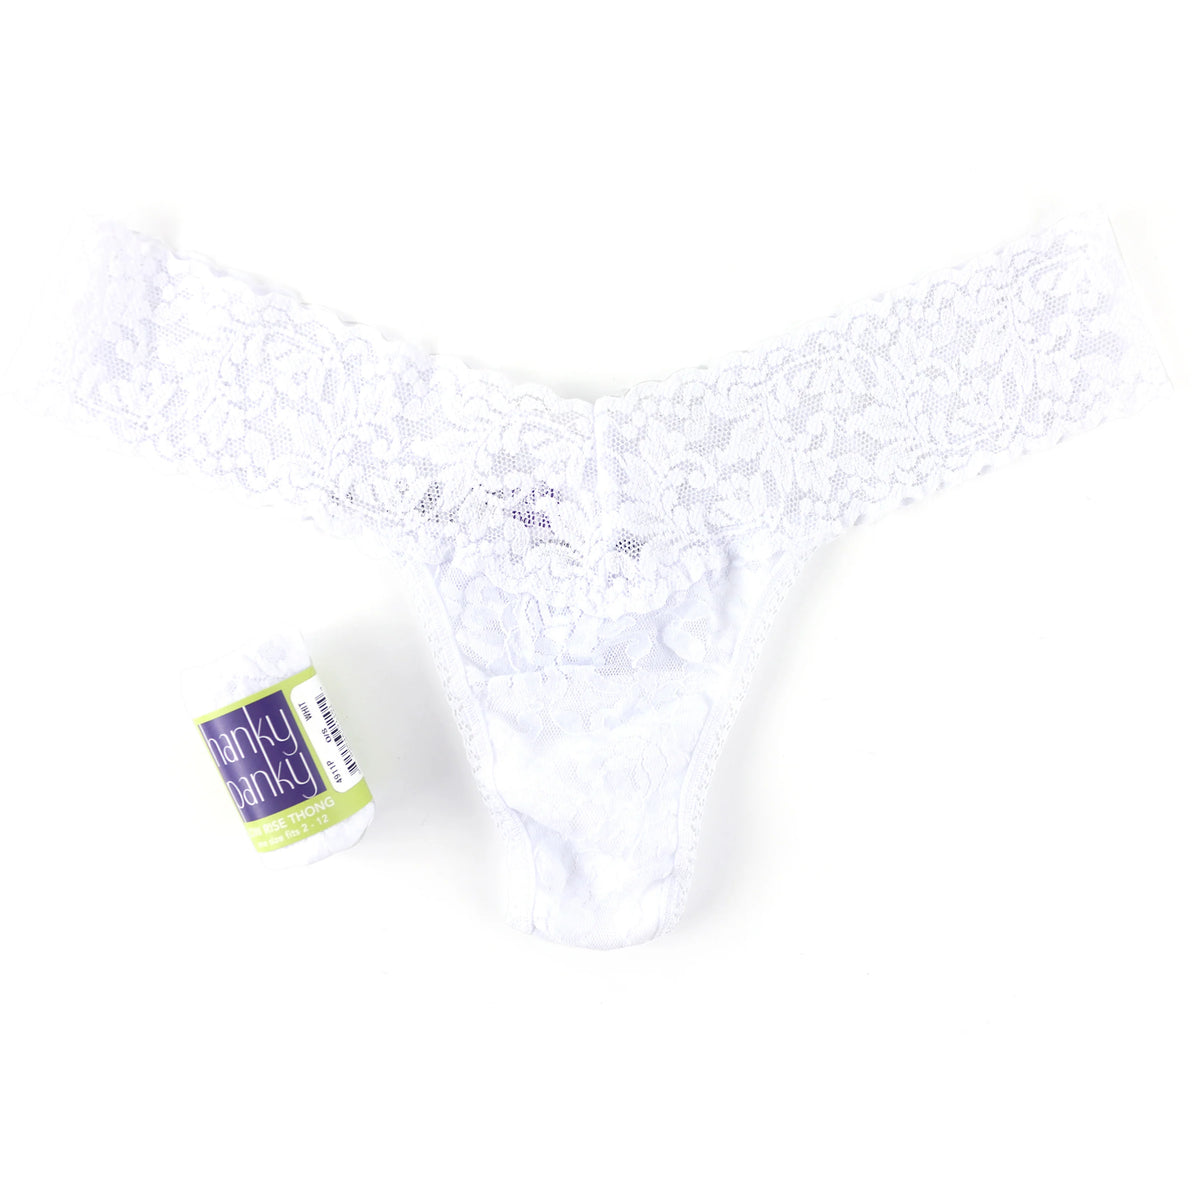 HANKY PANKY SIGNATURE LACE LOW RISE THONG – Tops & Bottoms